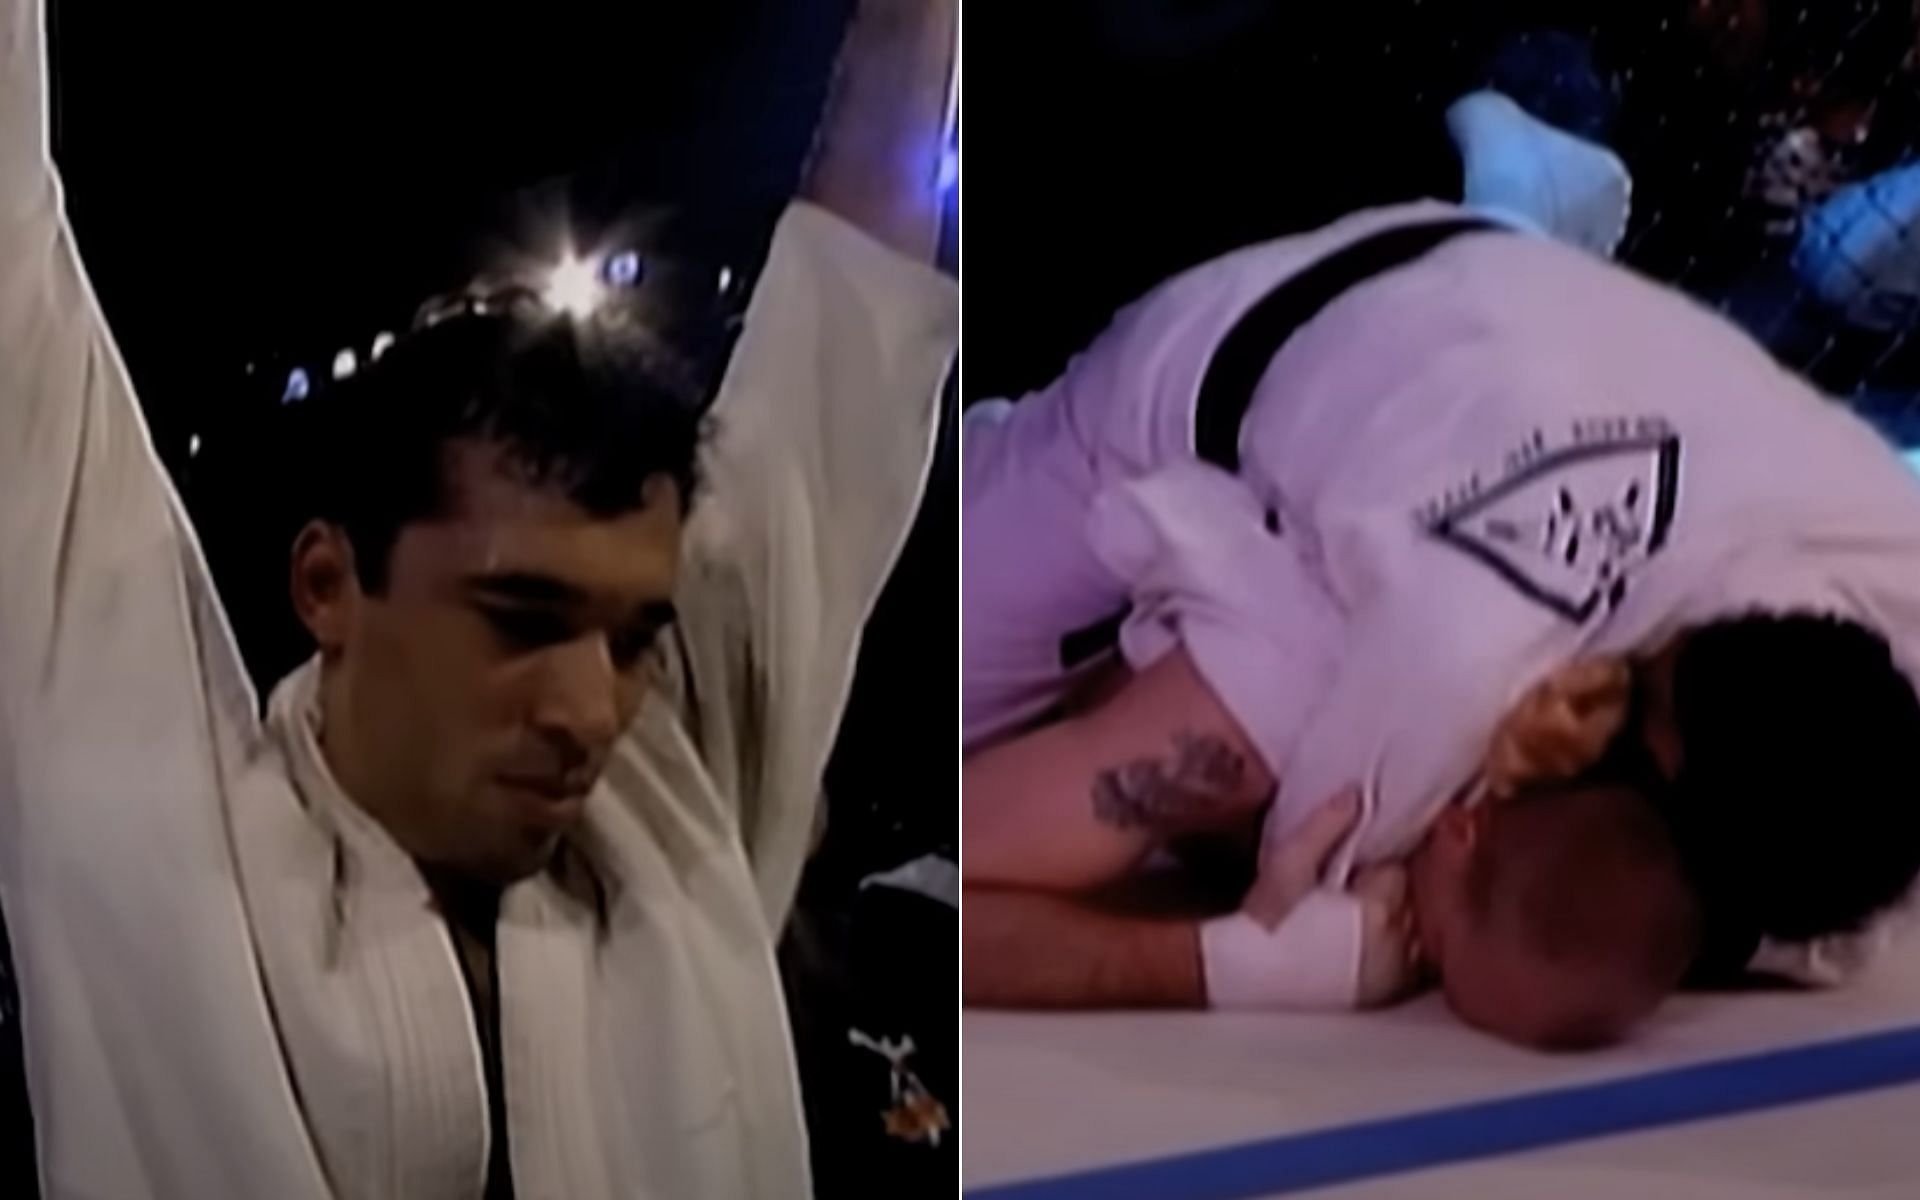 Royce Gracie [Left], and Royce Gracie submits Gerard Gordeau [Right] [Photo credit: UFC - YouTube]